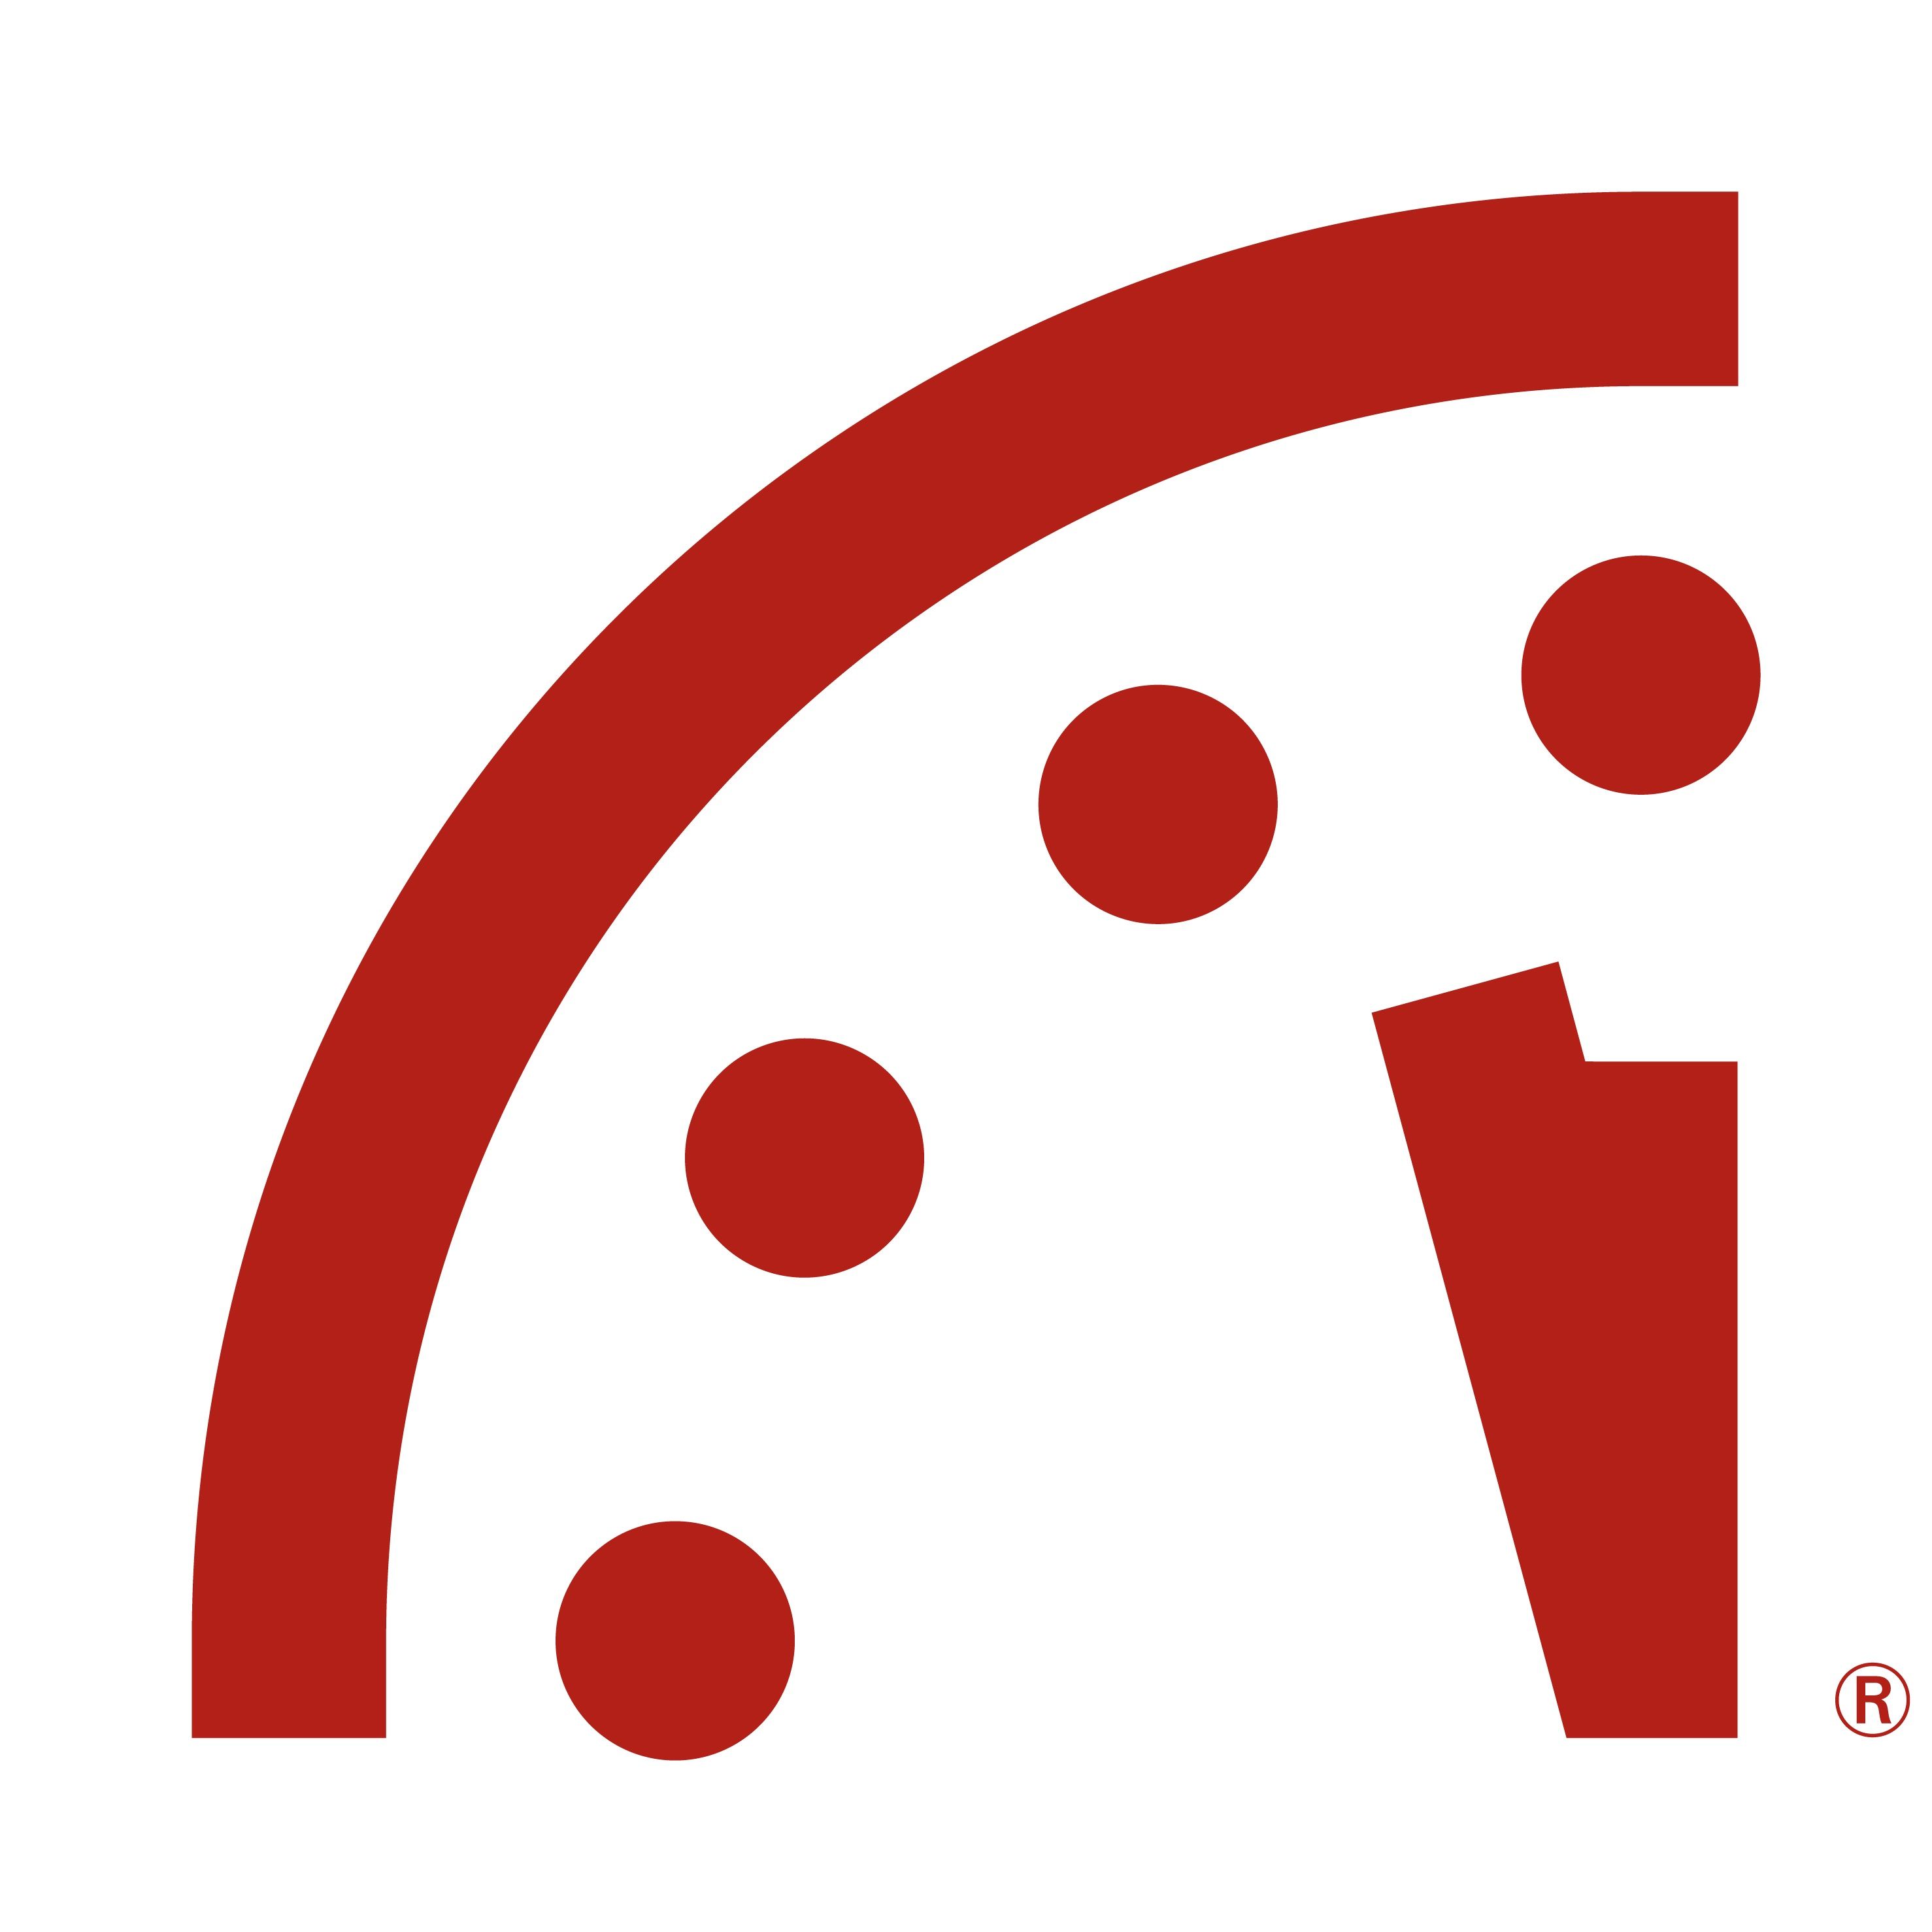 The Doomsday clock, the logo of The Bulletin of the Atomic Scientists, showing two and a half minutes to midnight. 